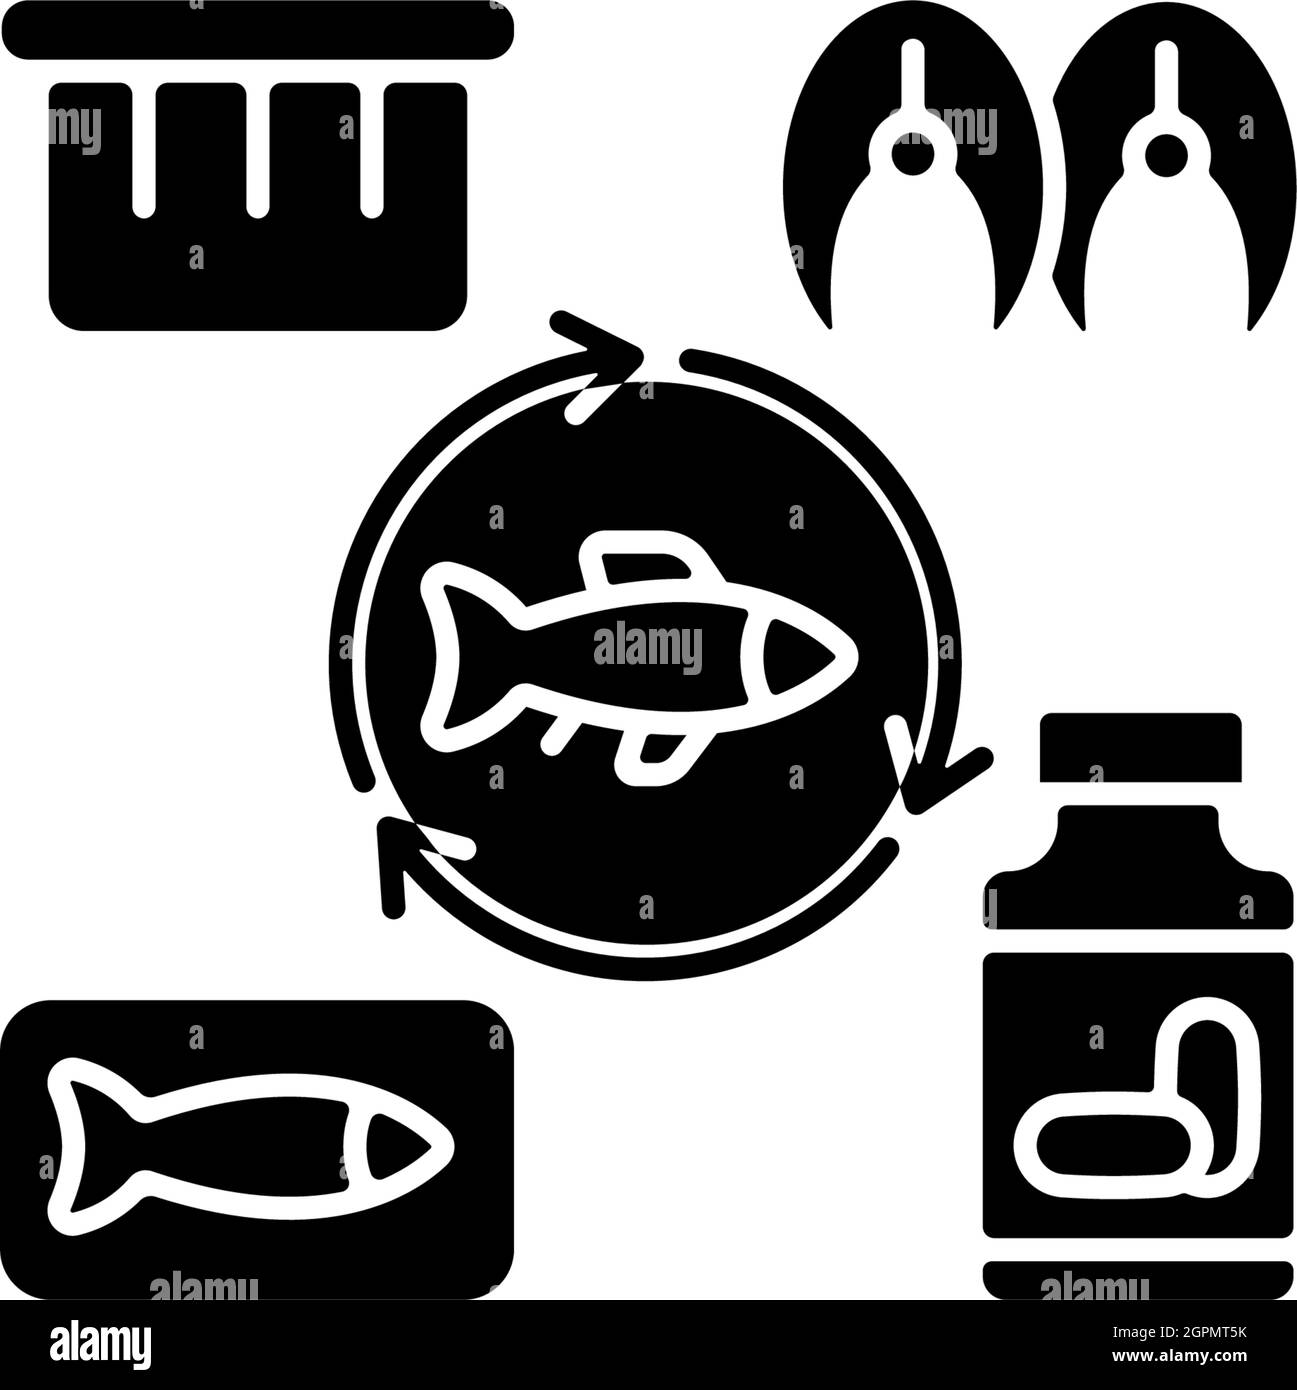 Producing fish products black glyph icon Stock Vector